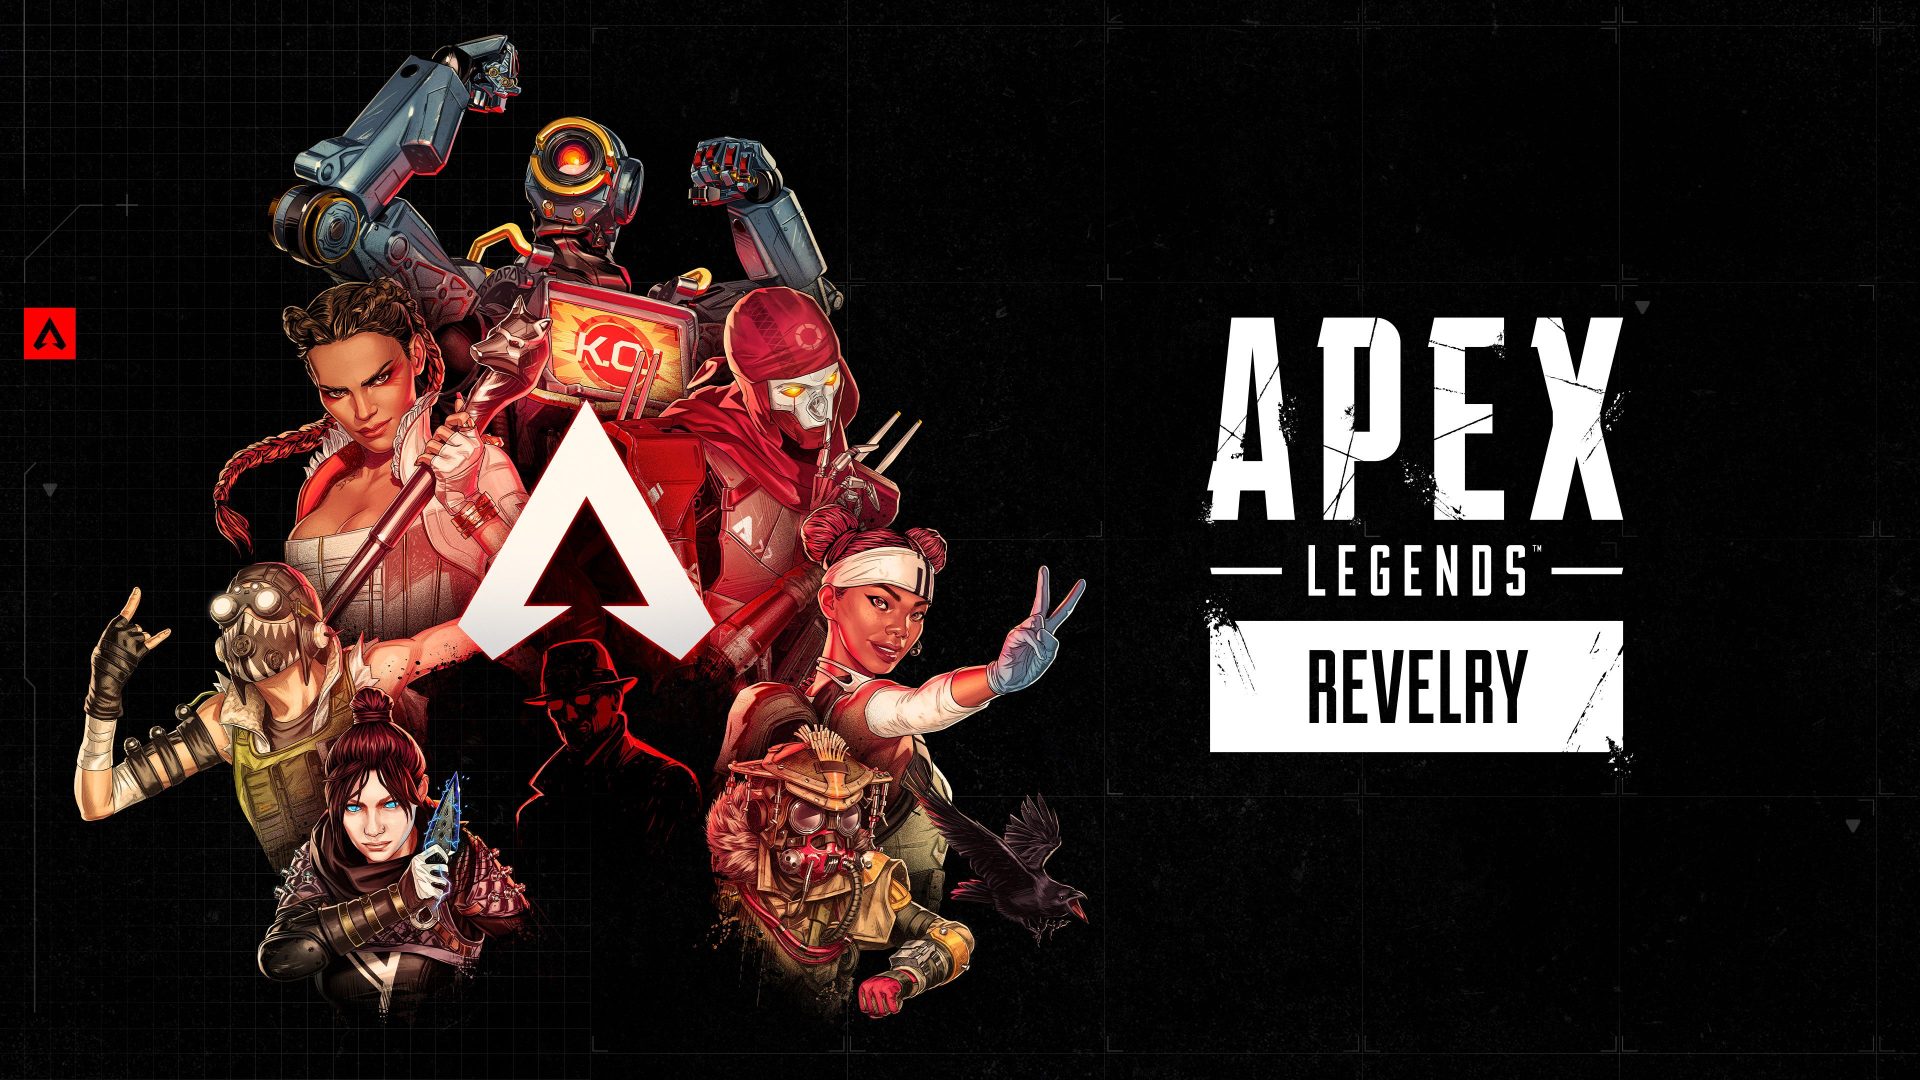 When will Apex Legends come to PS5 and Xbox Series X